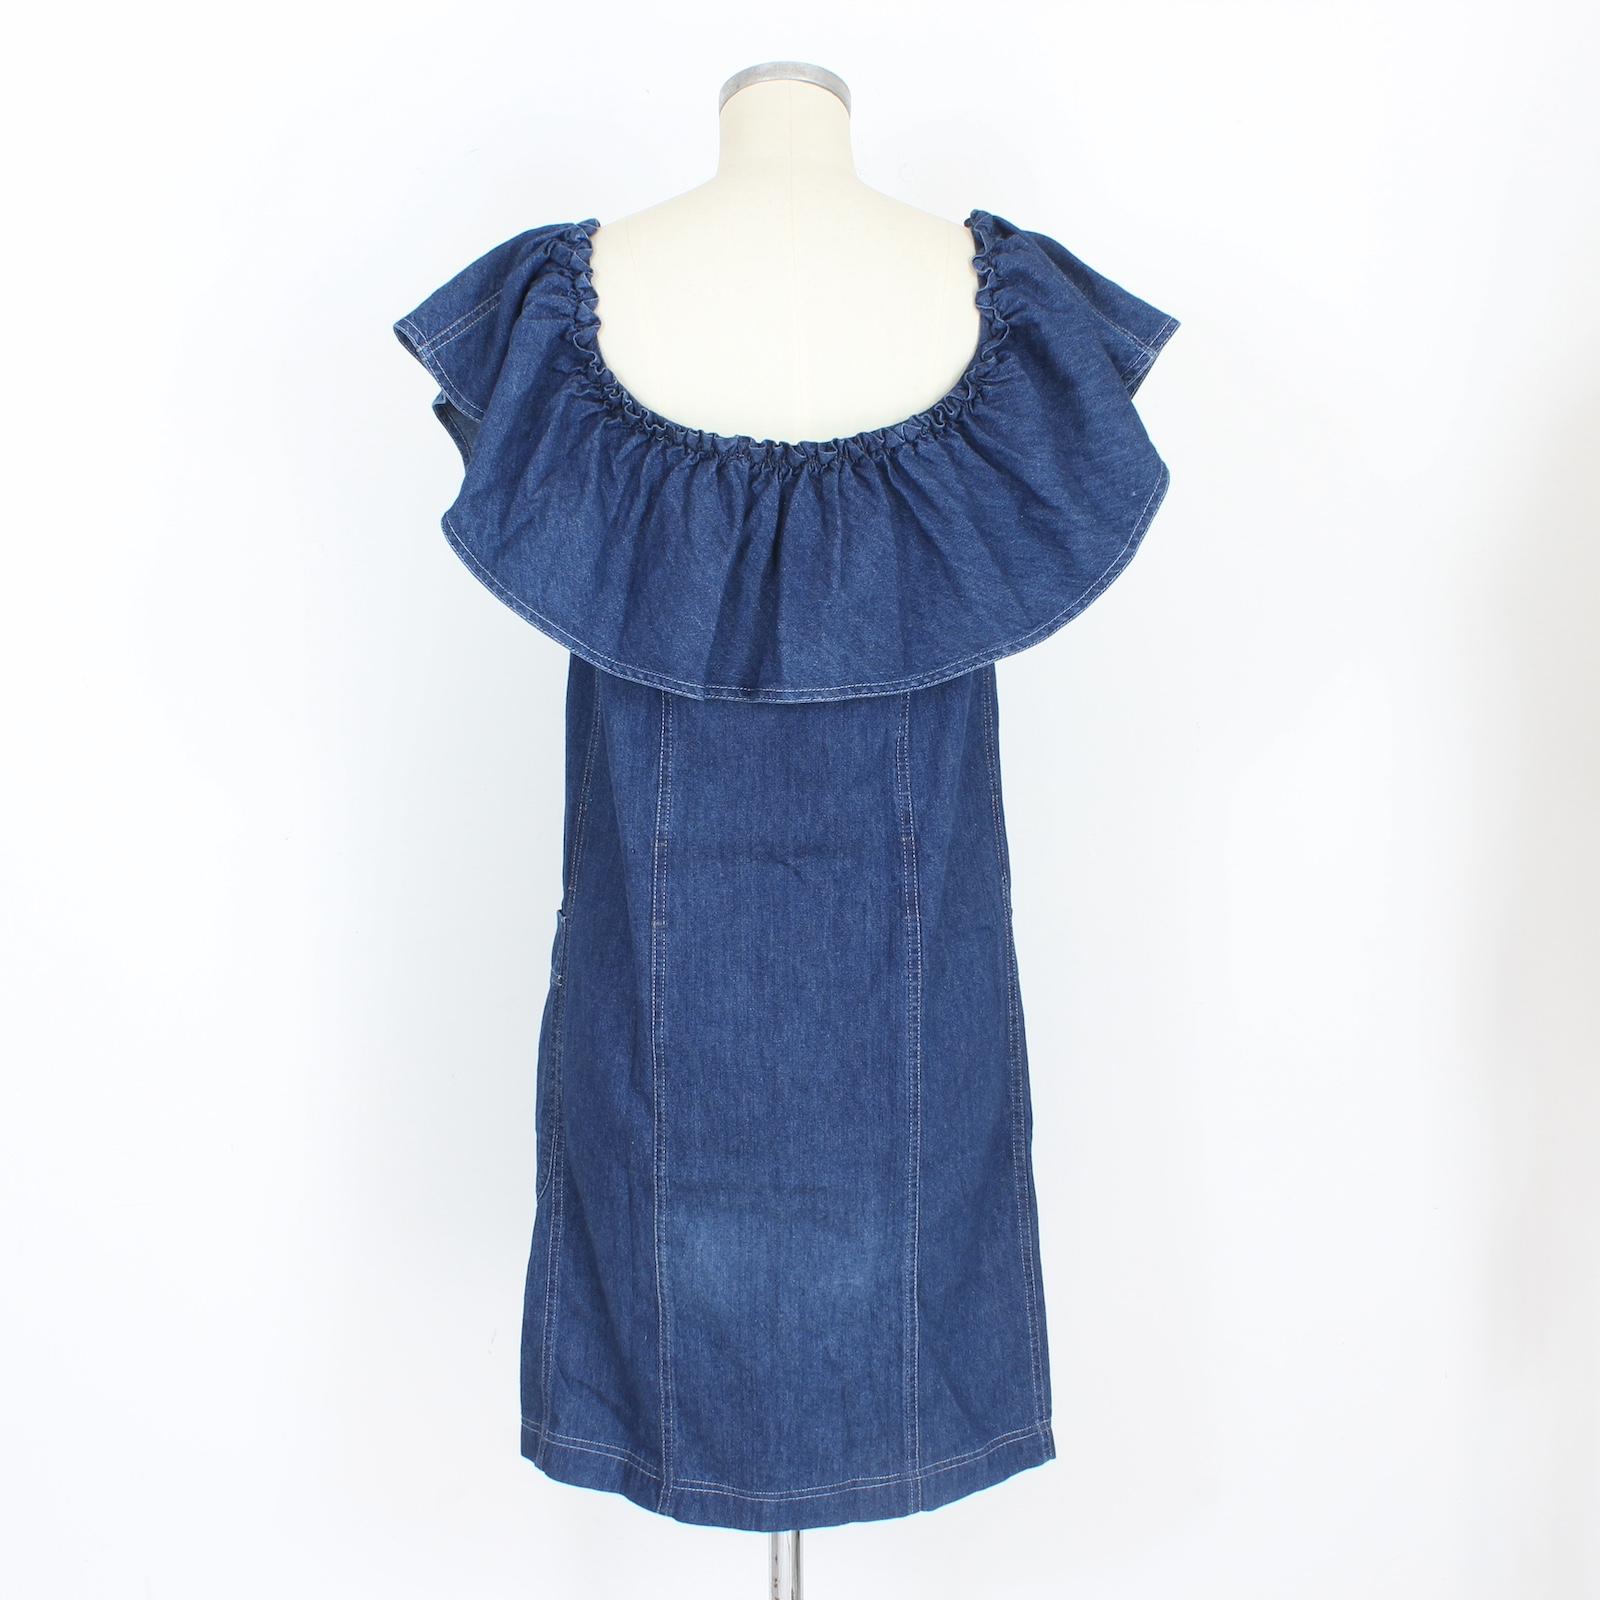 Moschino vintage 80s blue denim rouches dress. Shirt dress, button closure along the front. Gathered neckline that falls to the shoulders, pockets on the sides. 100% cotton fabric. Made in Italy.

Size: 42 It 8 Us 10 Uk

Shoulder: 44 cm
Bust/Chest: